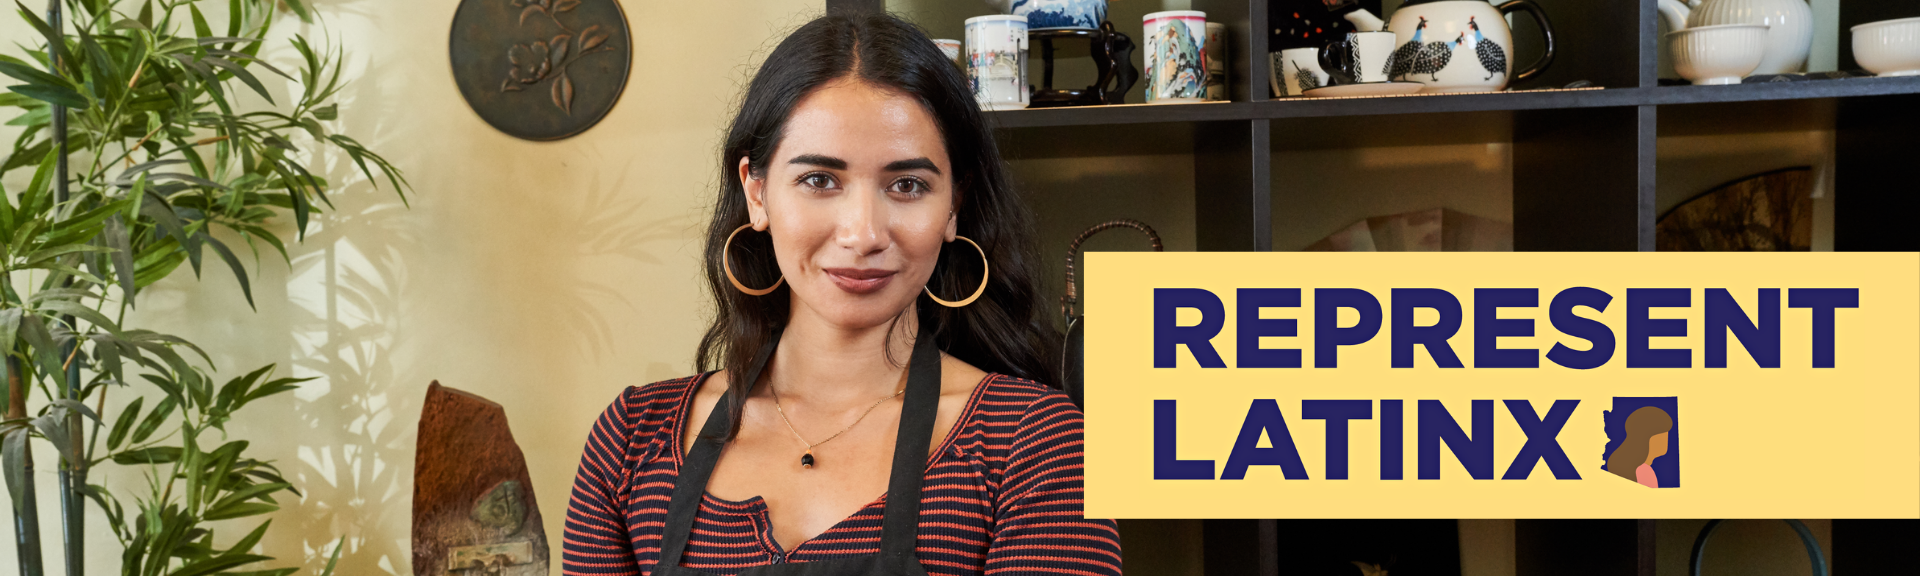 Woman smiling in apron at coffee shop with title "Represent Latinx"